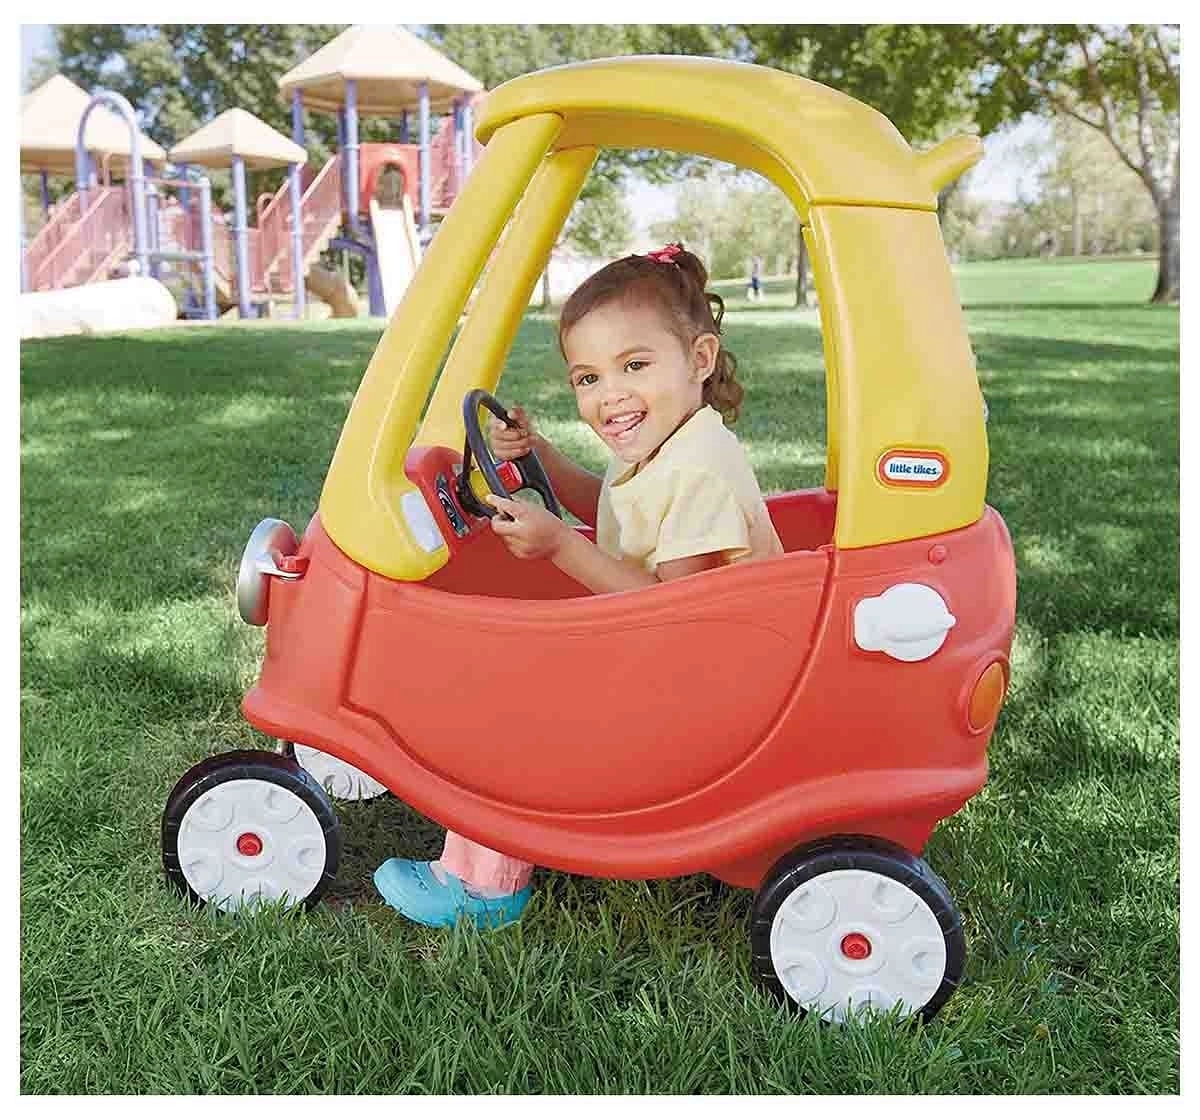 Buy online Little Tikes Cozy Coupe at Best Price